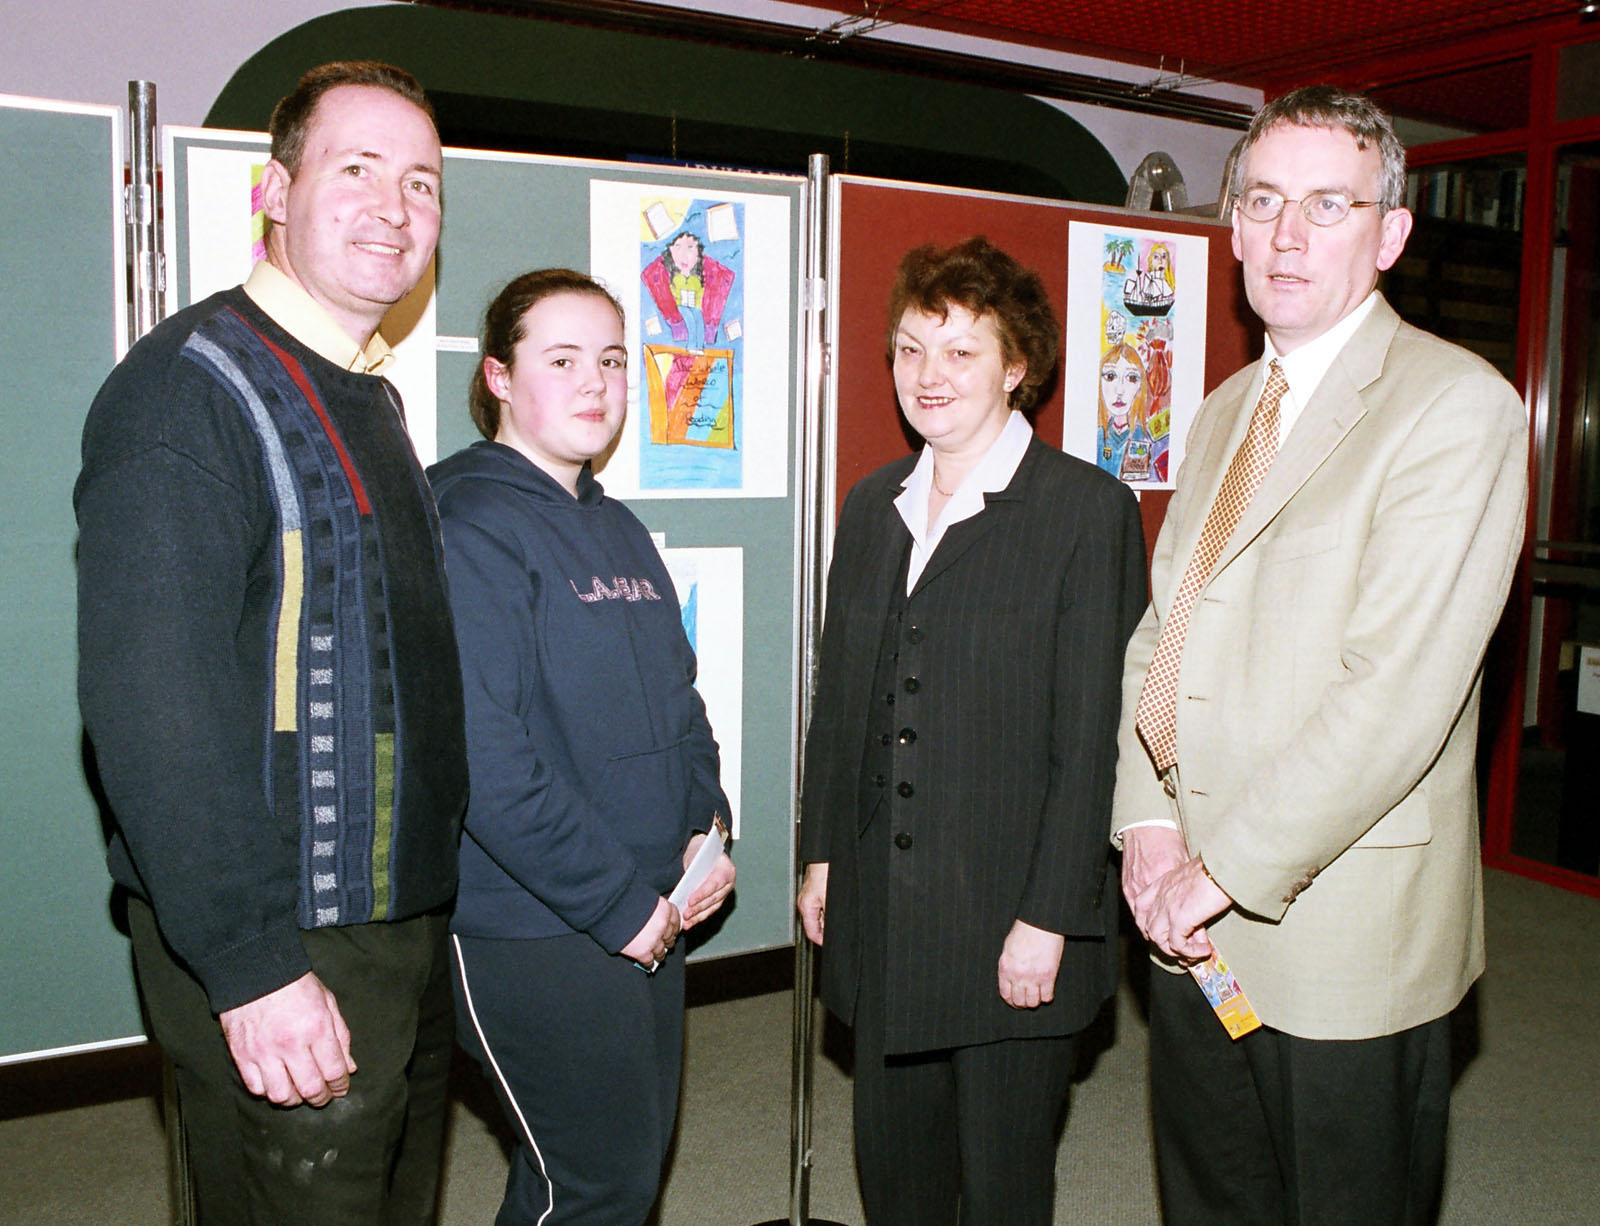 Pictured at Castlebar Library, the Bookmark design competition from Book Week Merit Award Winner Grace Ryan. L-R: Pat Ryan, Grace Ryan, Mary Conway, Austin Vaughan (County Librarian). Photo  Ken Wright Photography 2004.
